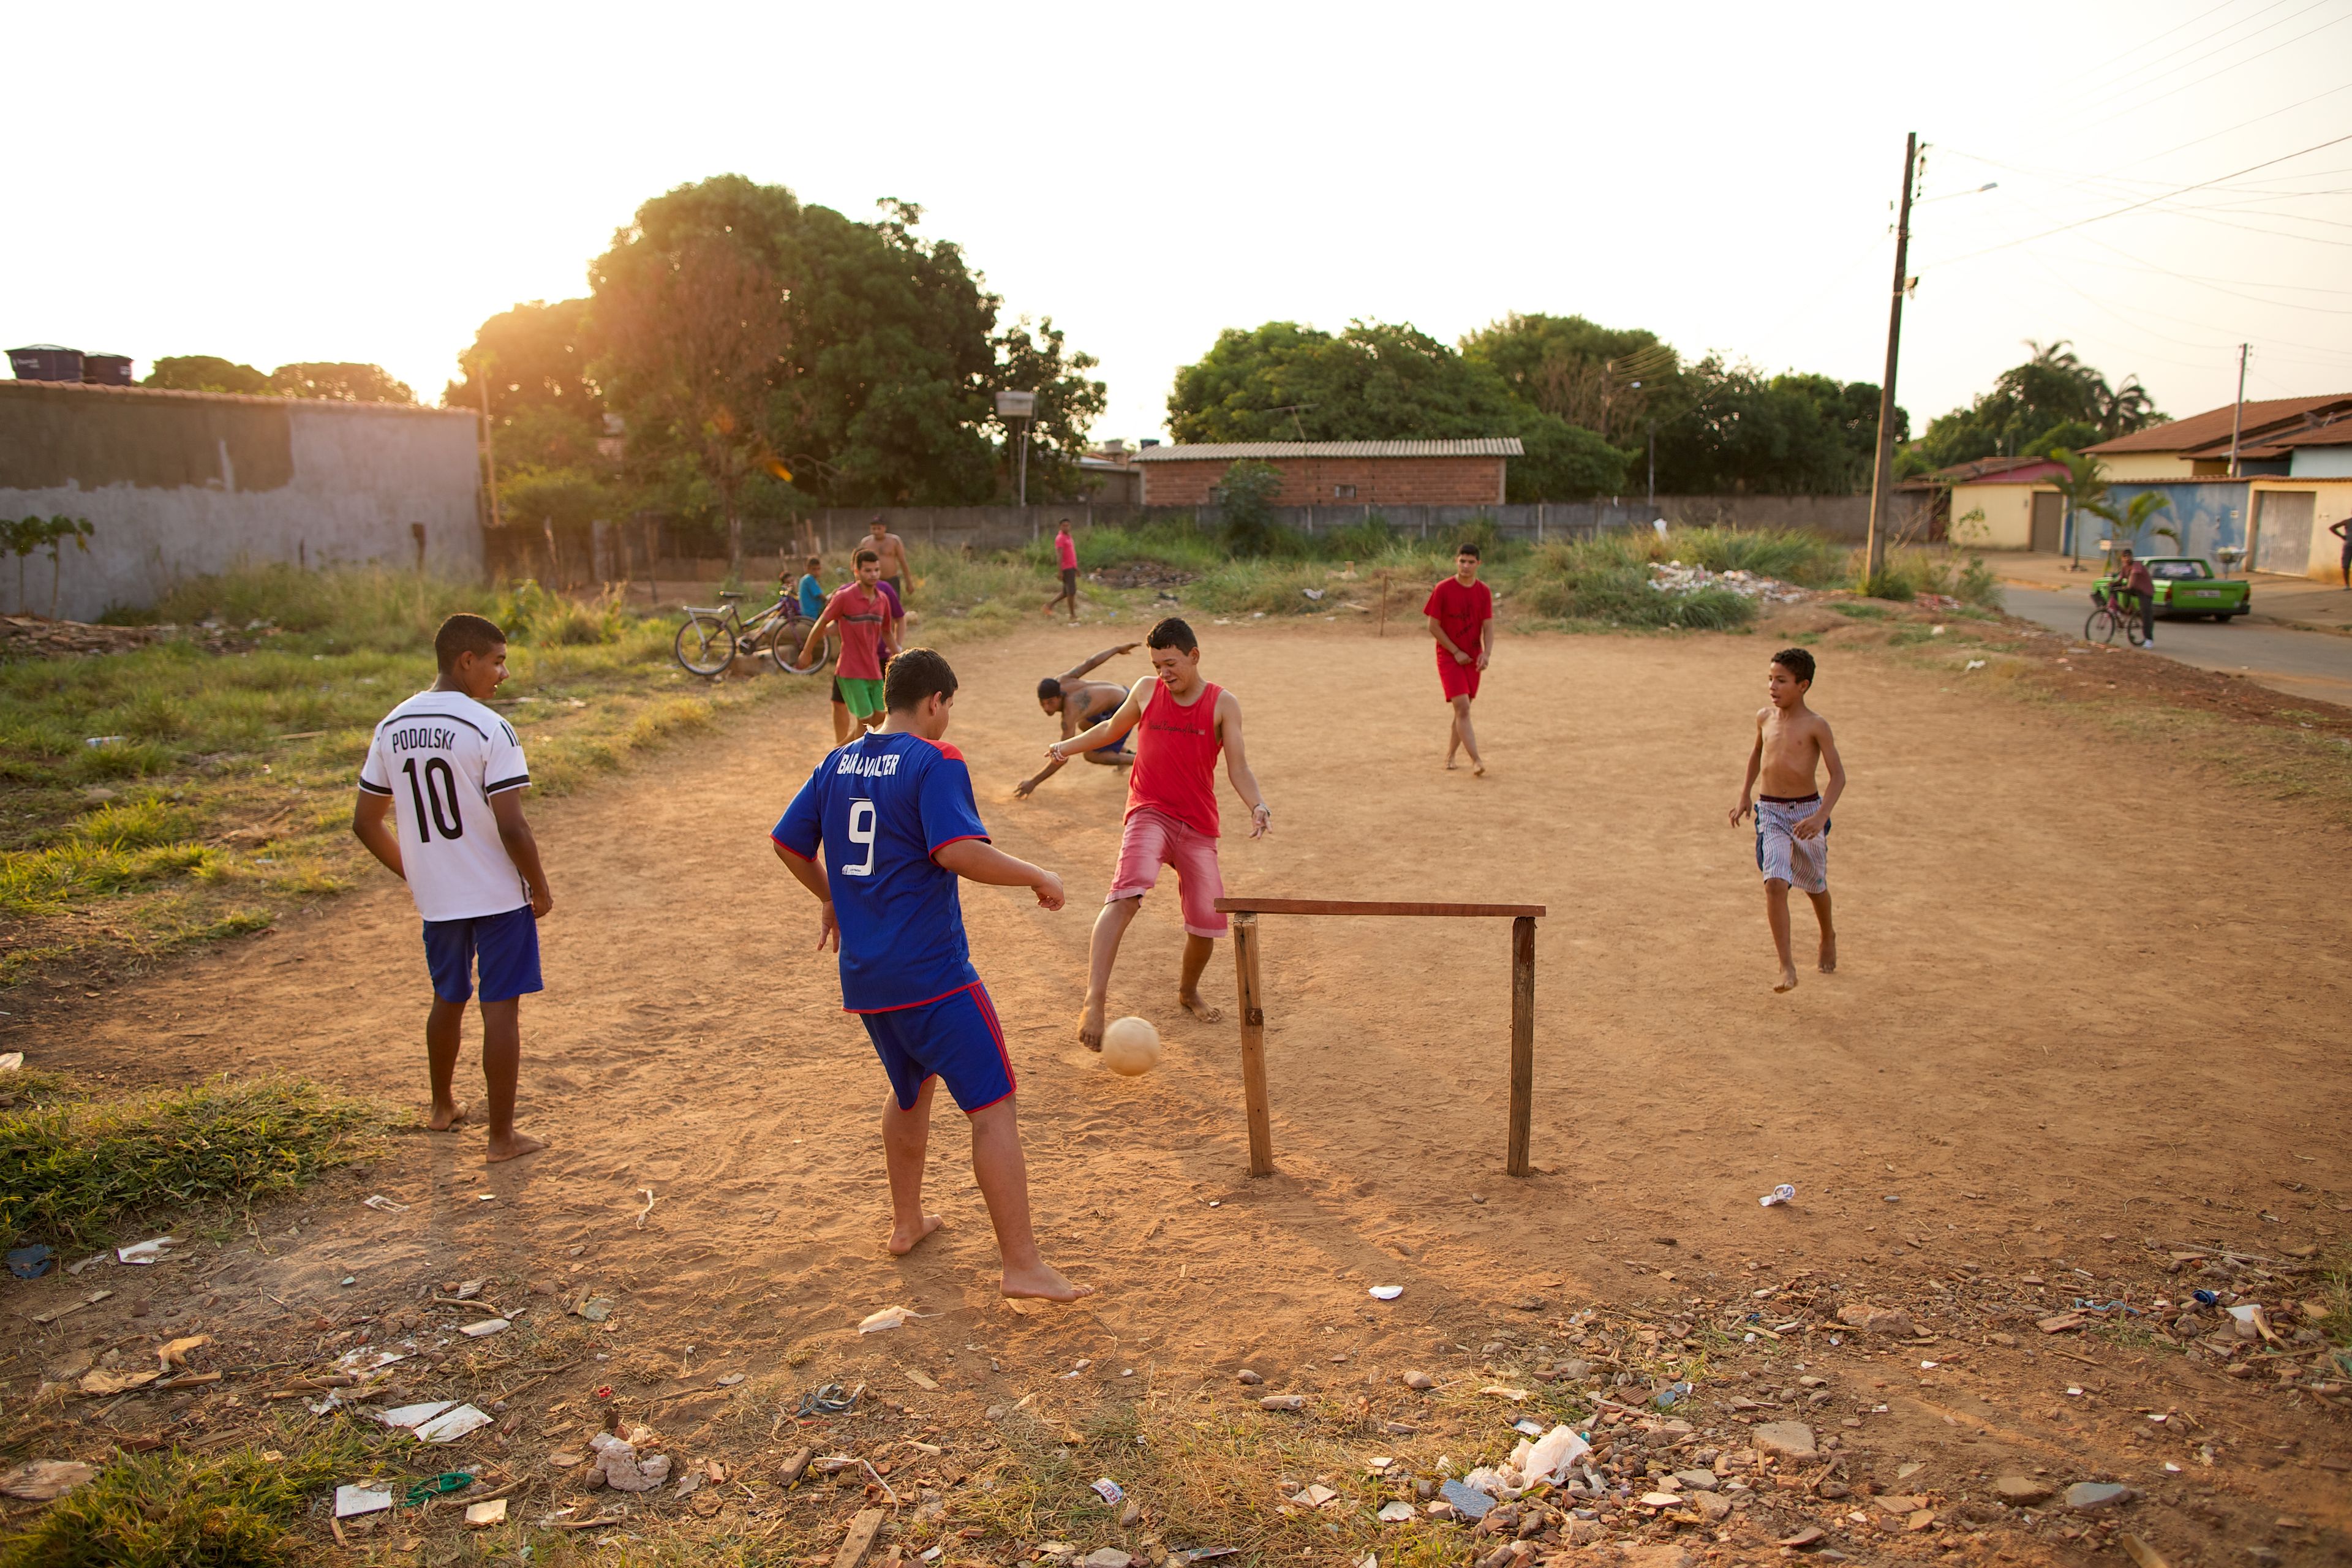 Young men in Brazil play soccer on a dirt field.